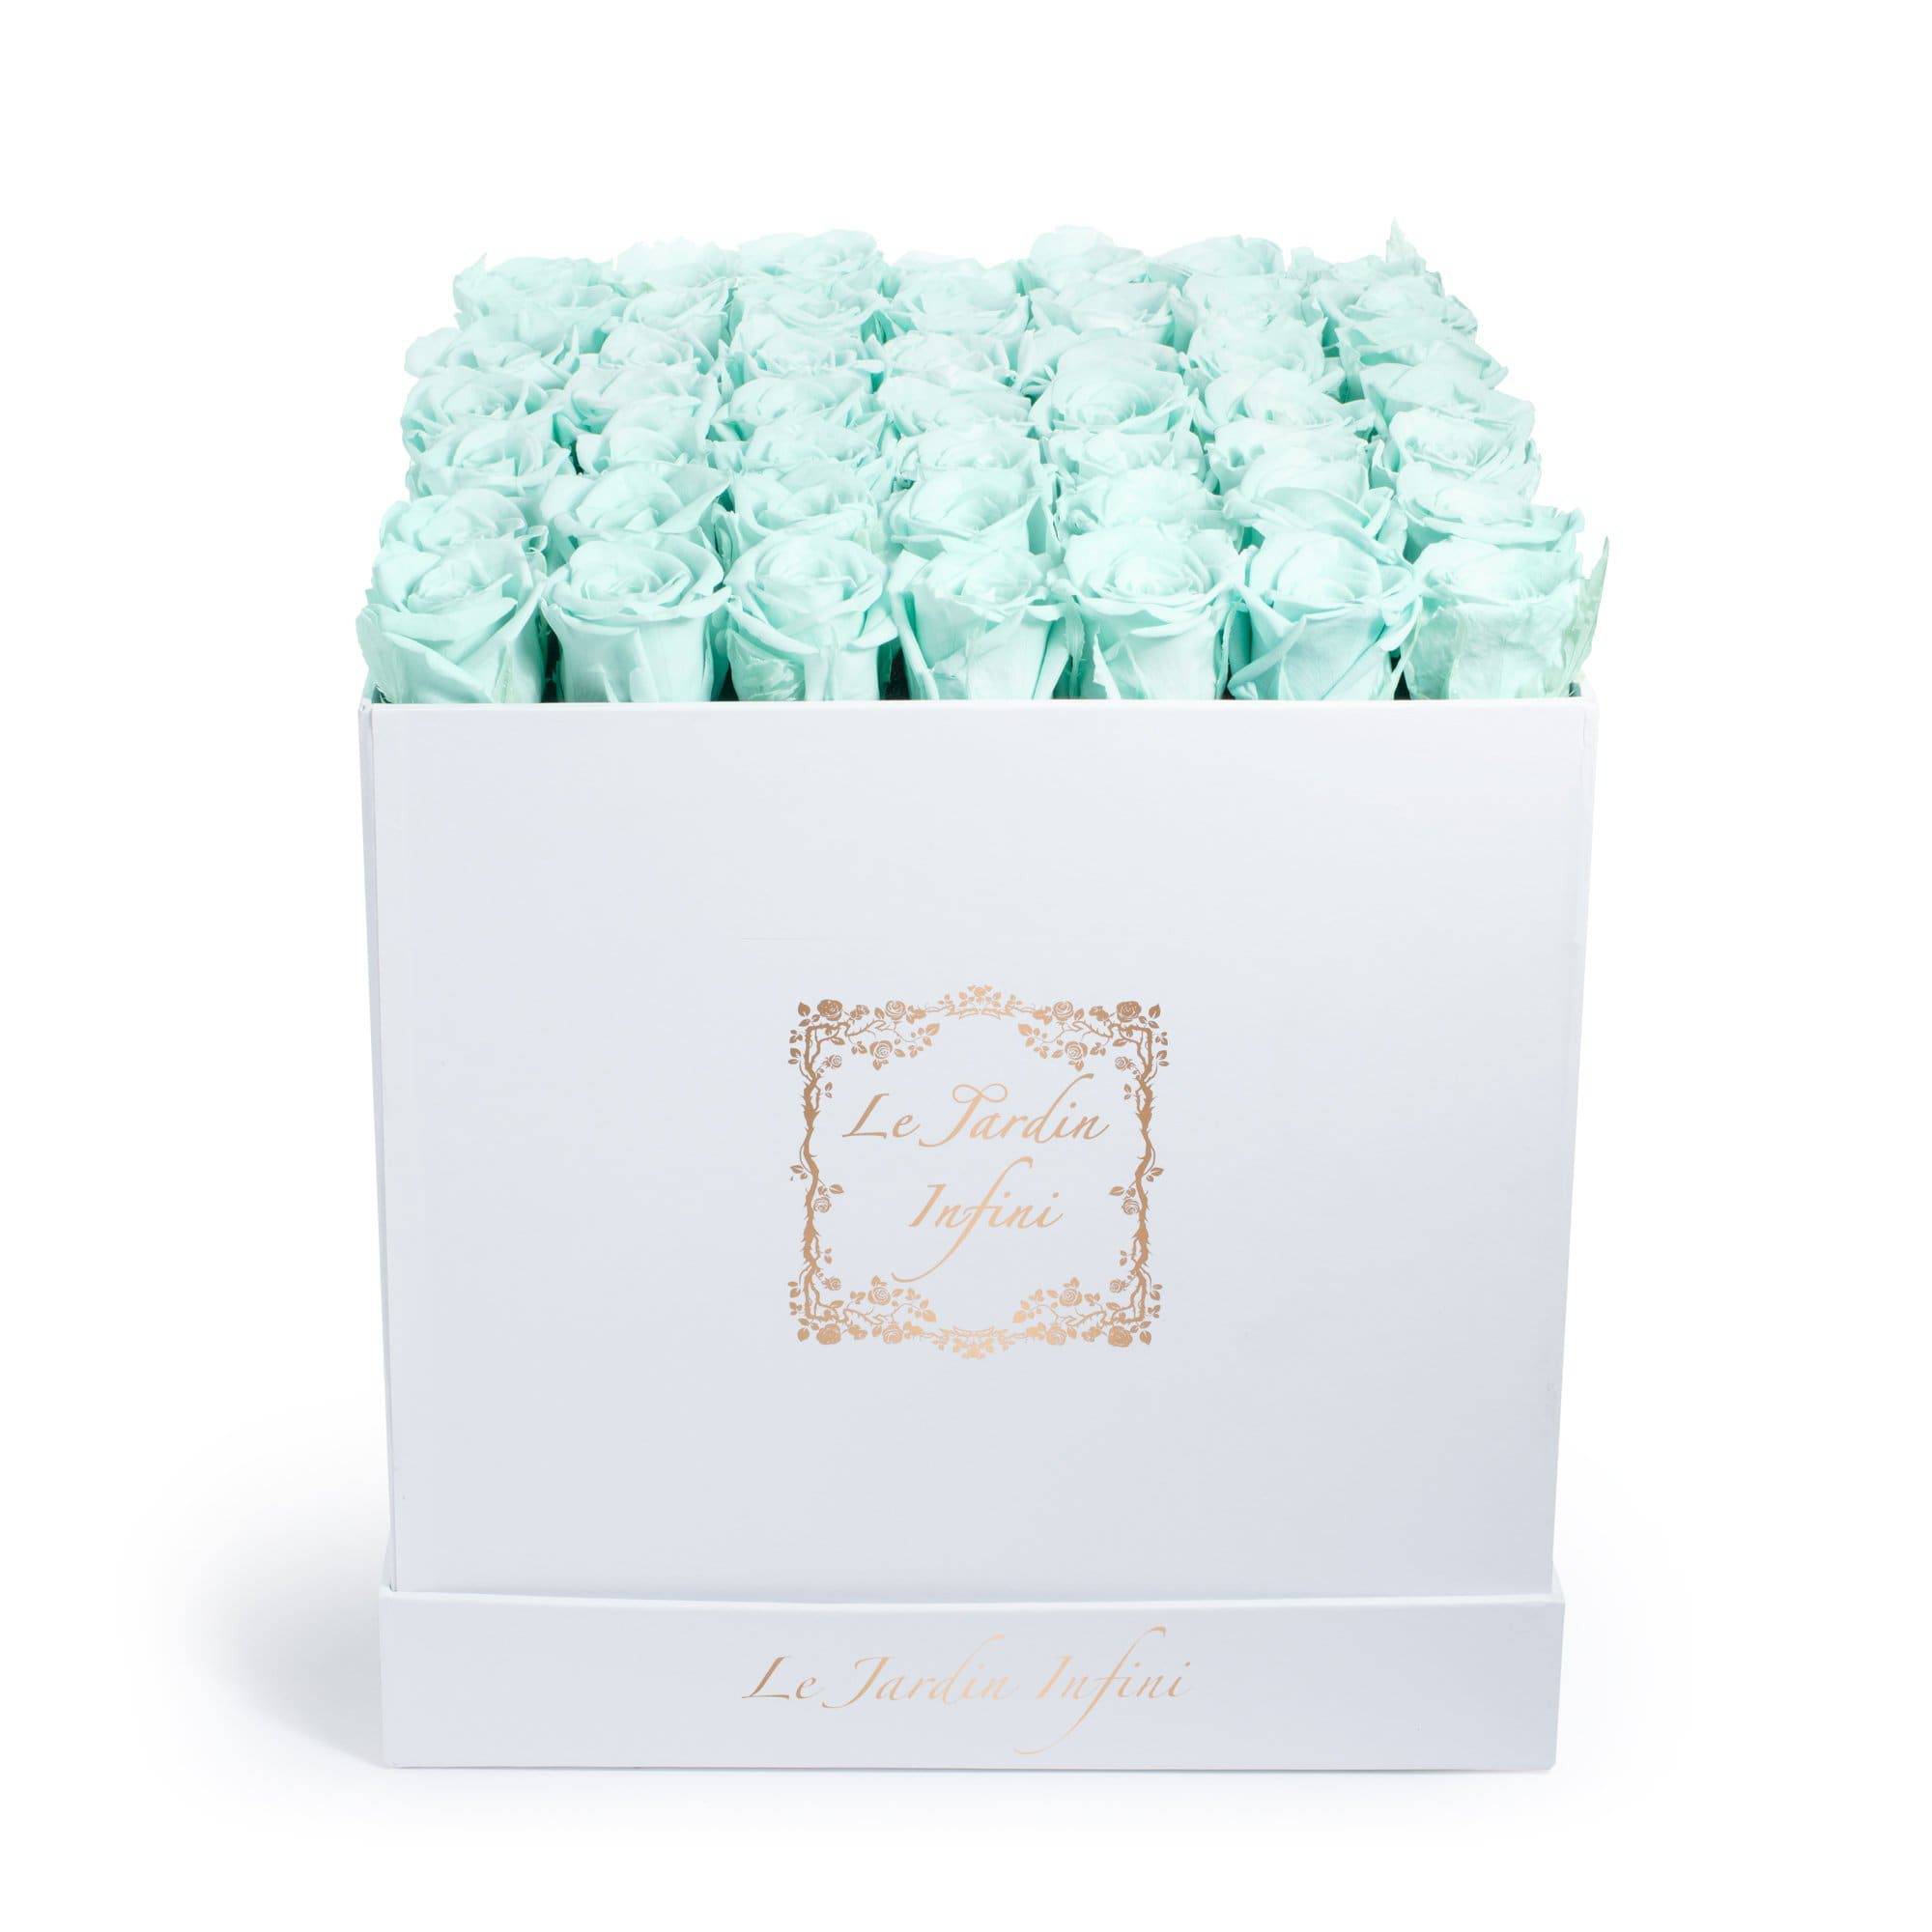 Light Green Preserved Roses - Large Square White Box - Le Jardin Infini Roses in a Box